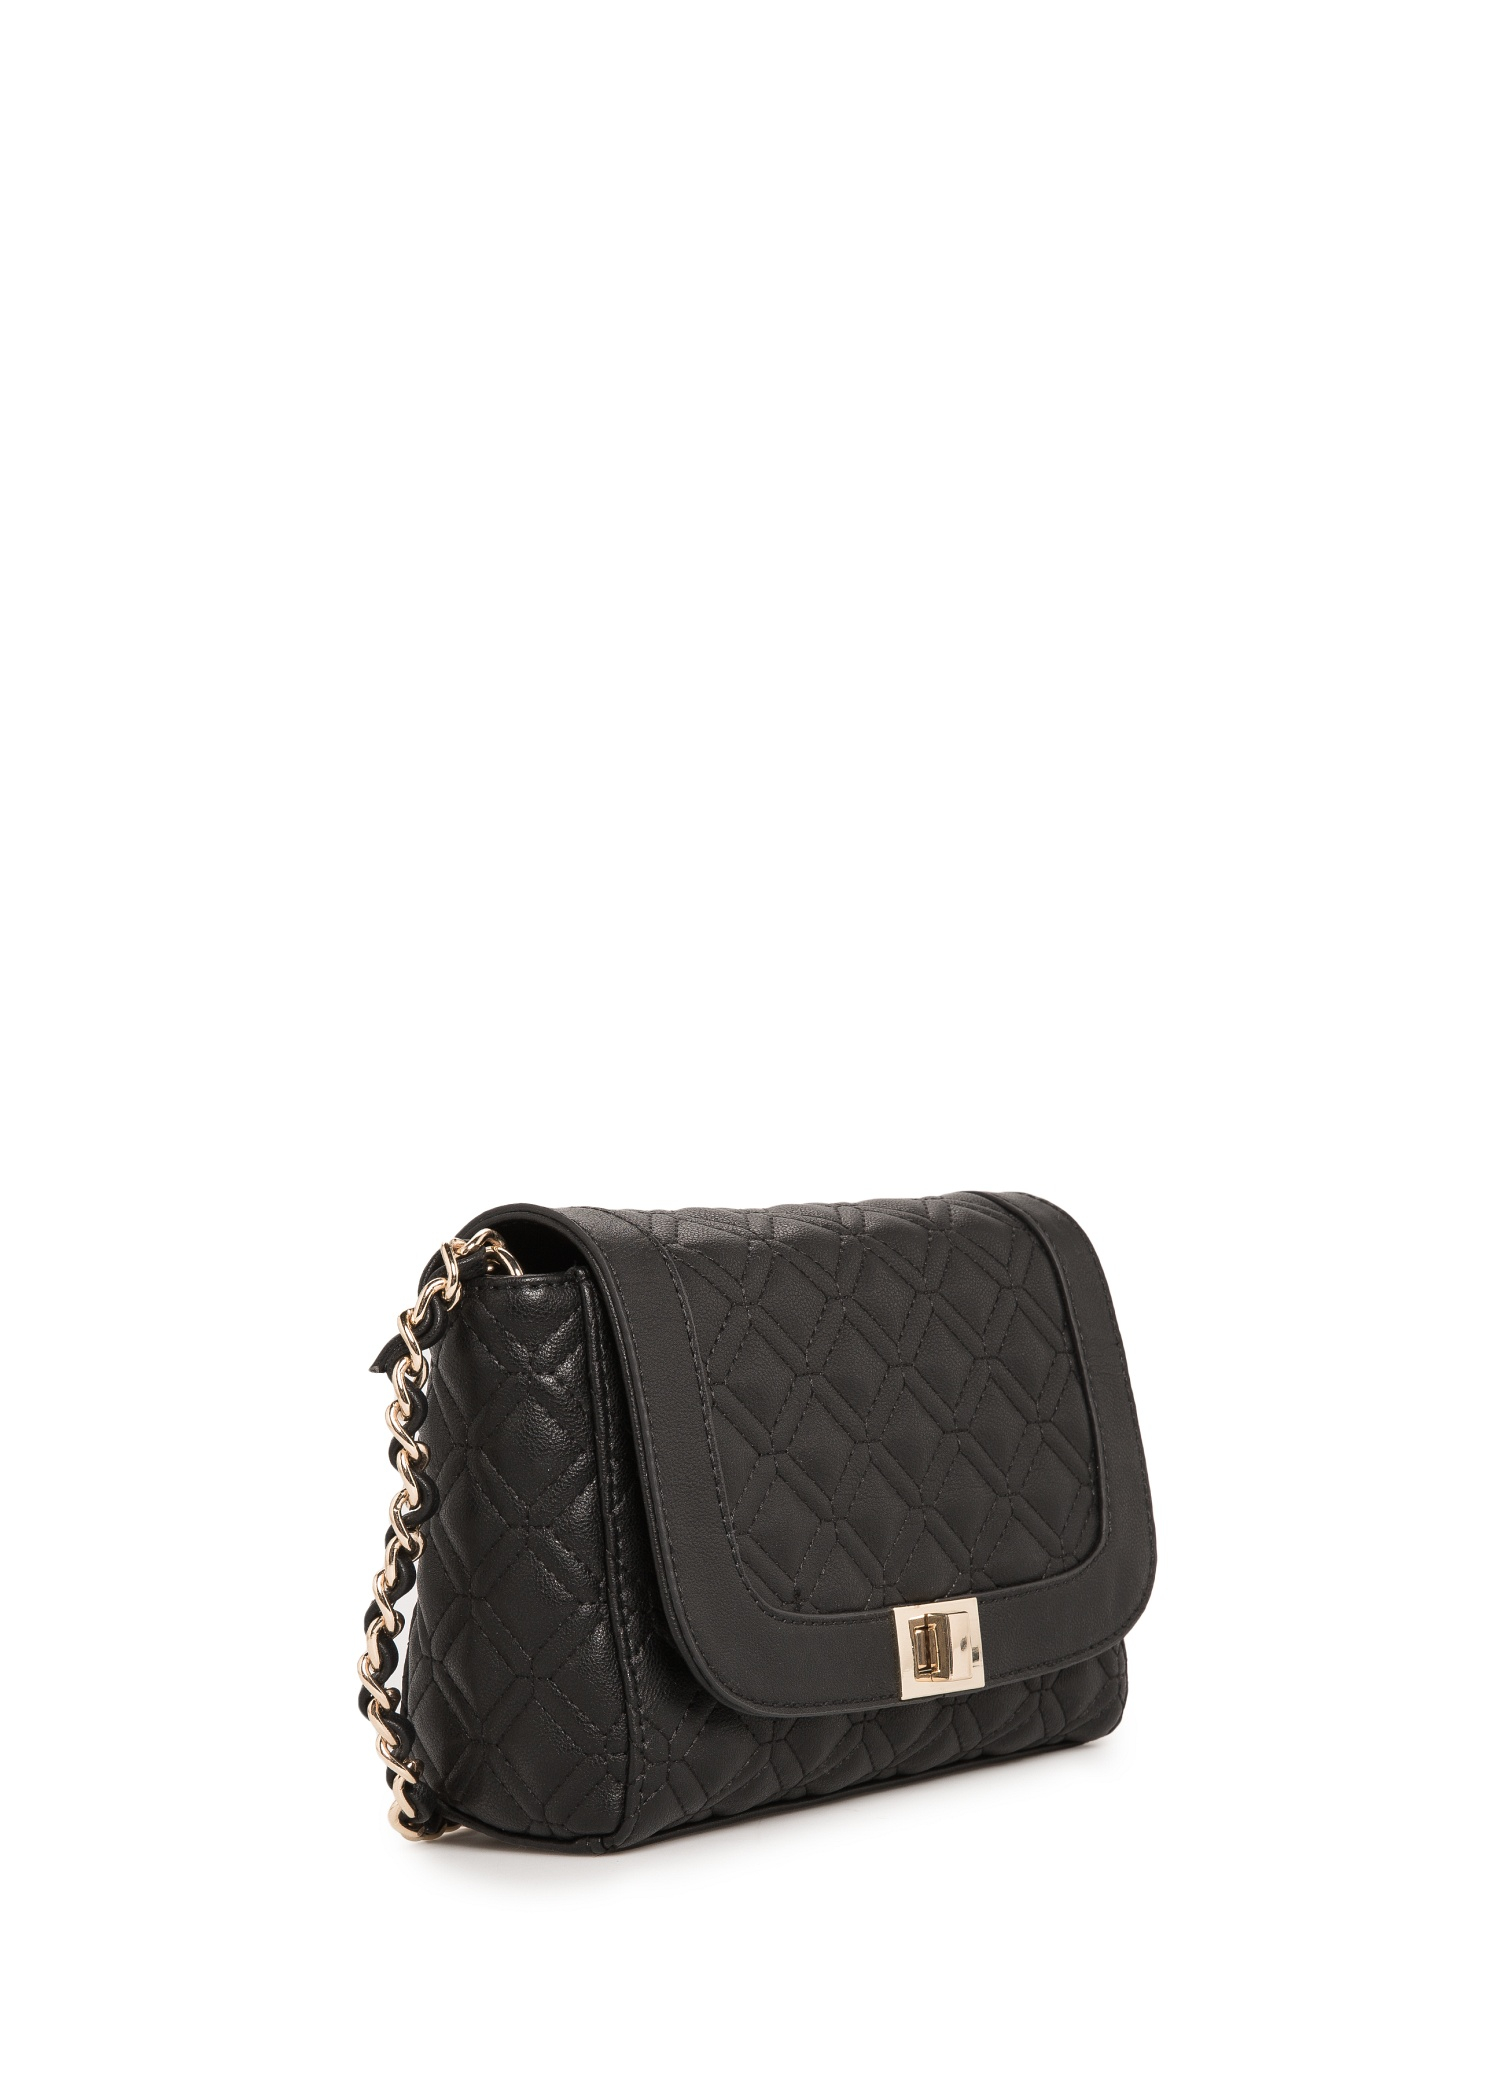 It offers a chic quilted texture, this Mango bag features a square ...